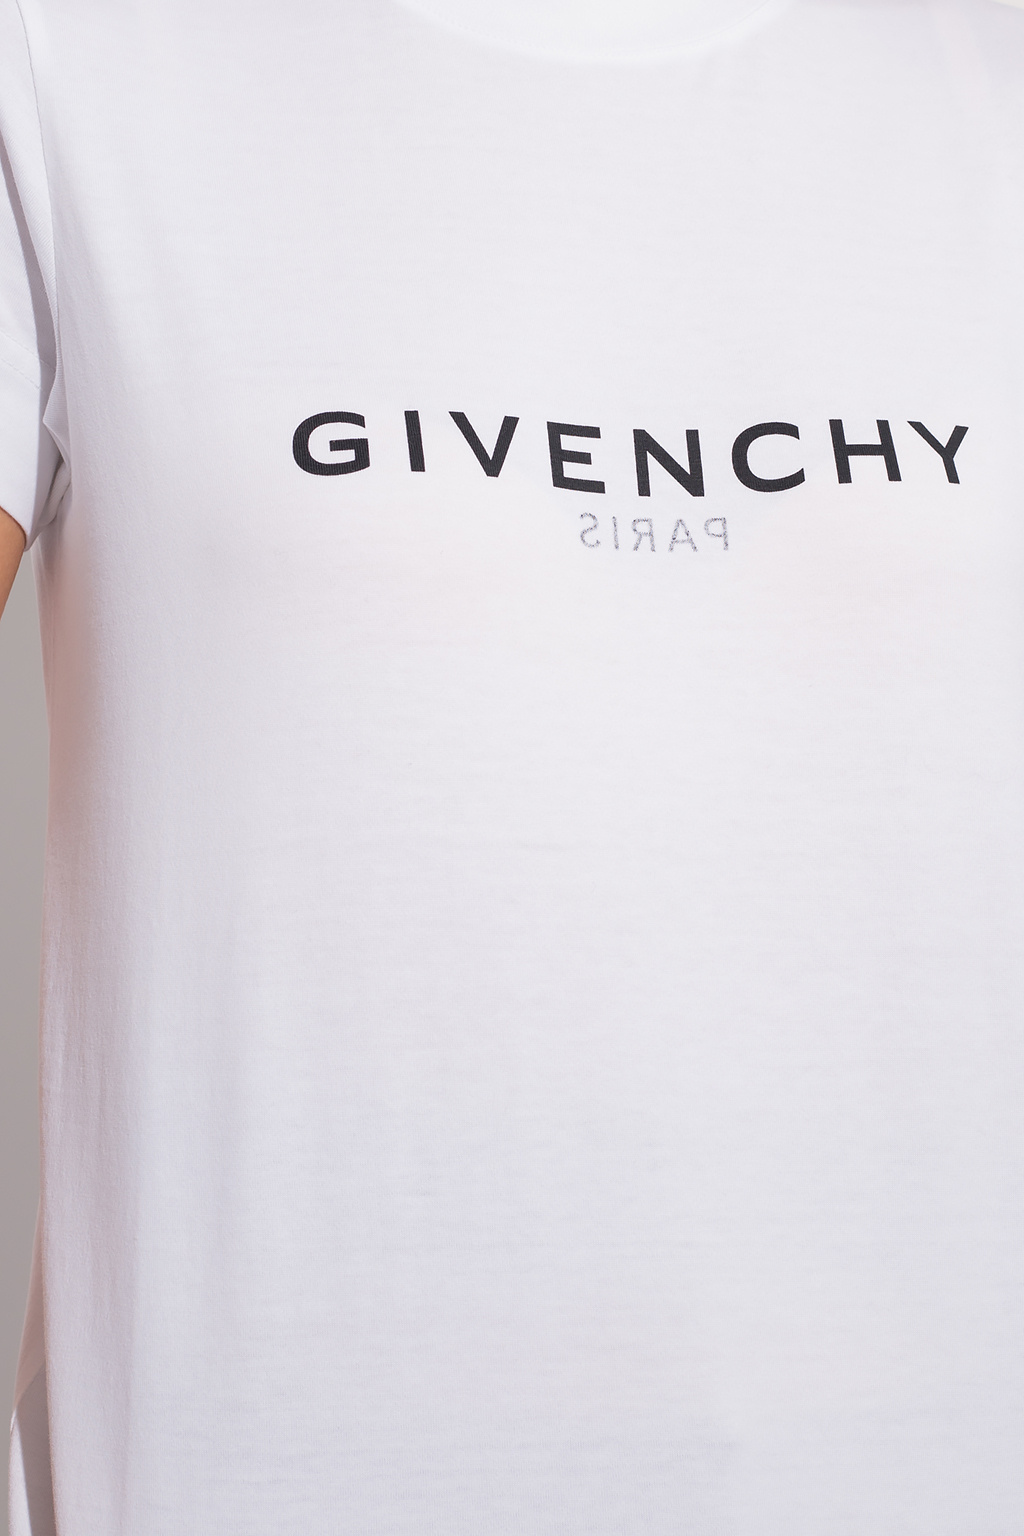 Givenchy Givenchy Pre-Owned Verzierte Ohrringe